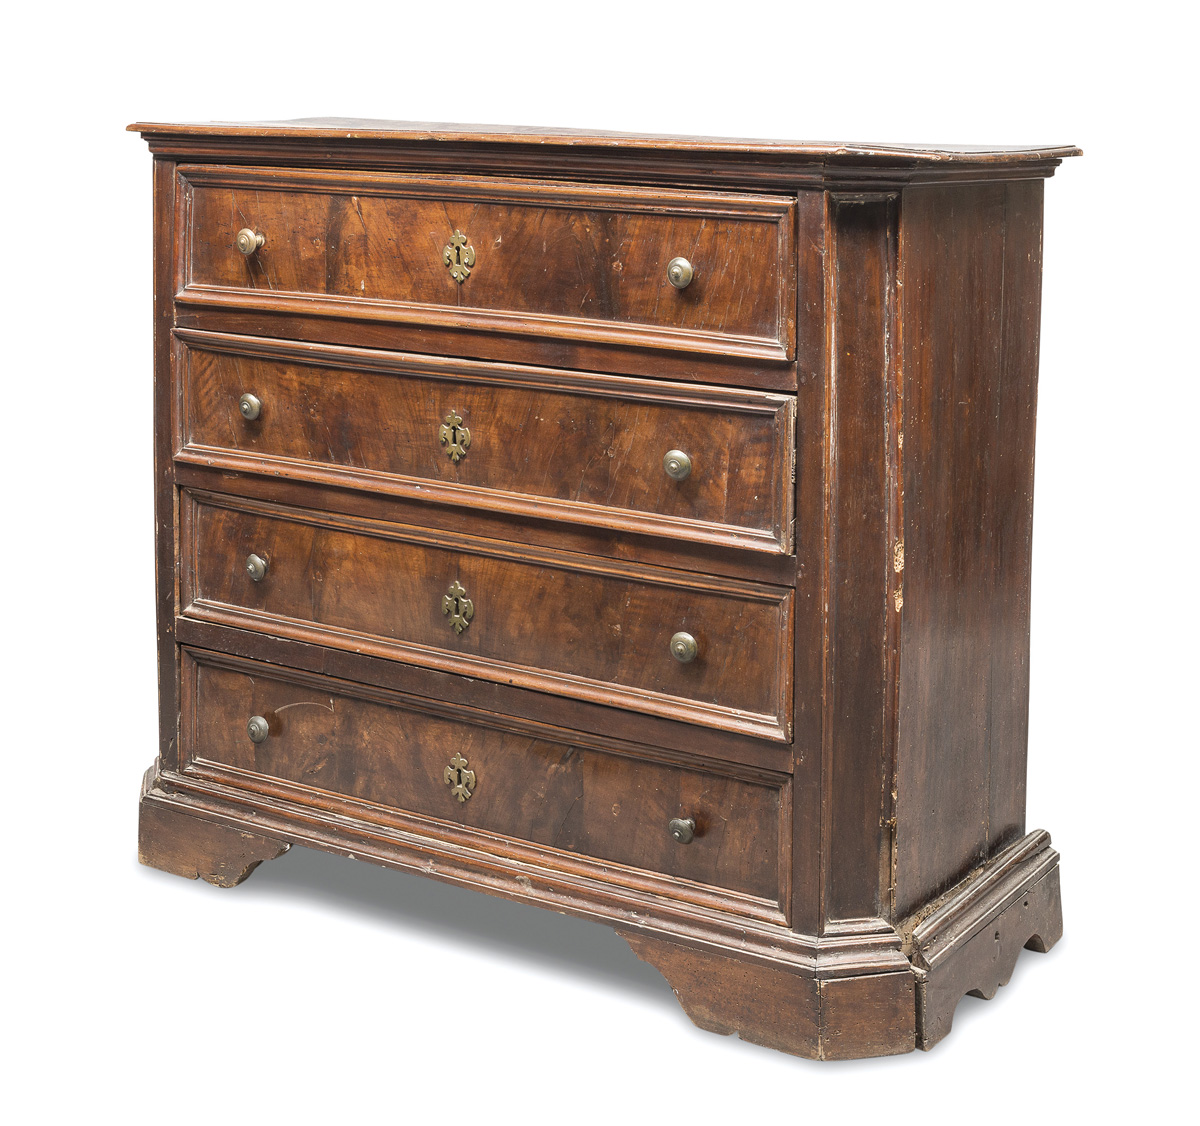 CHEST OF DRAWERS IN WALNUT, CENTRAL ITALY LATE 17TH CENTURY